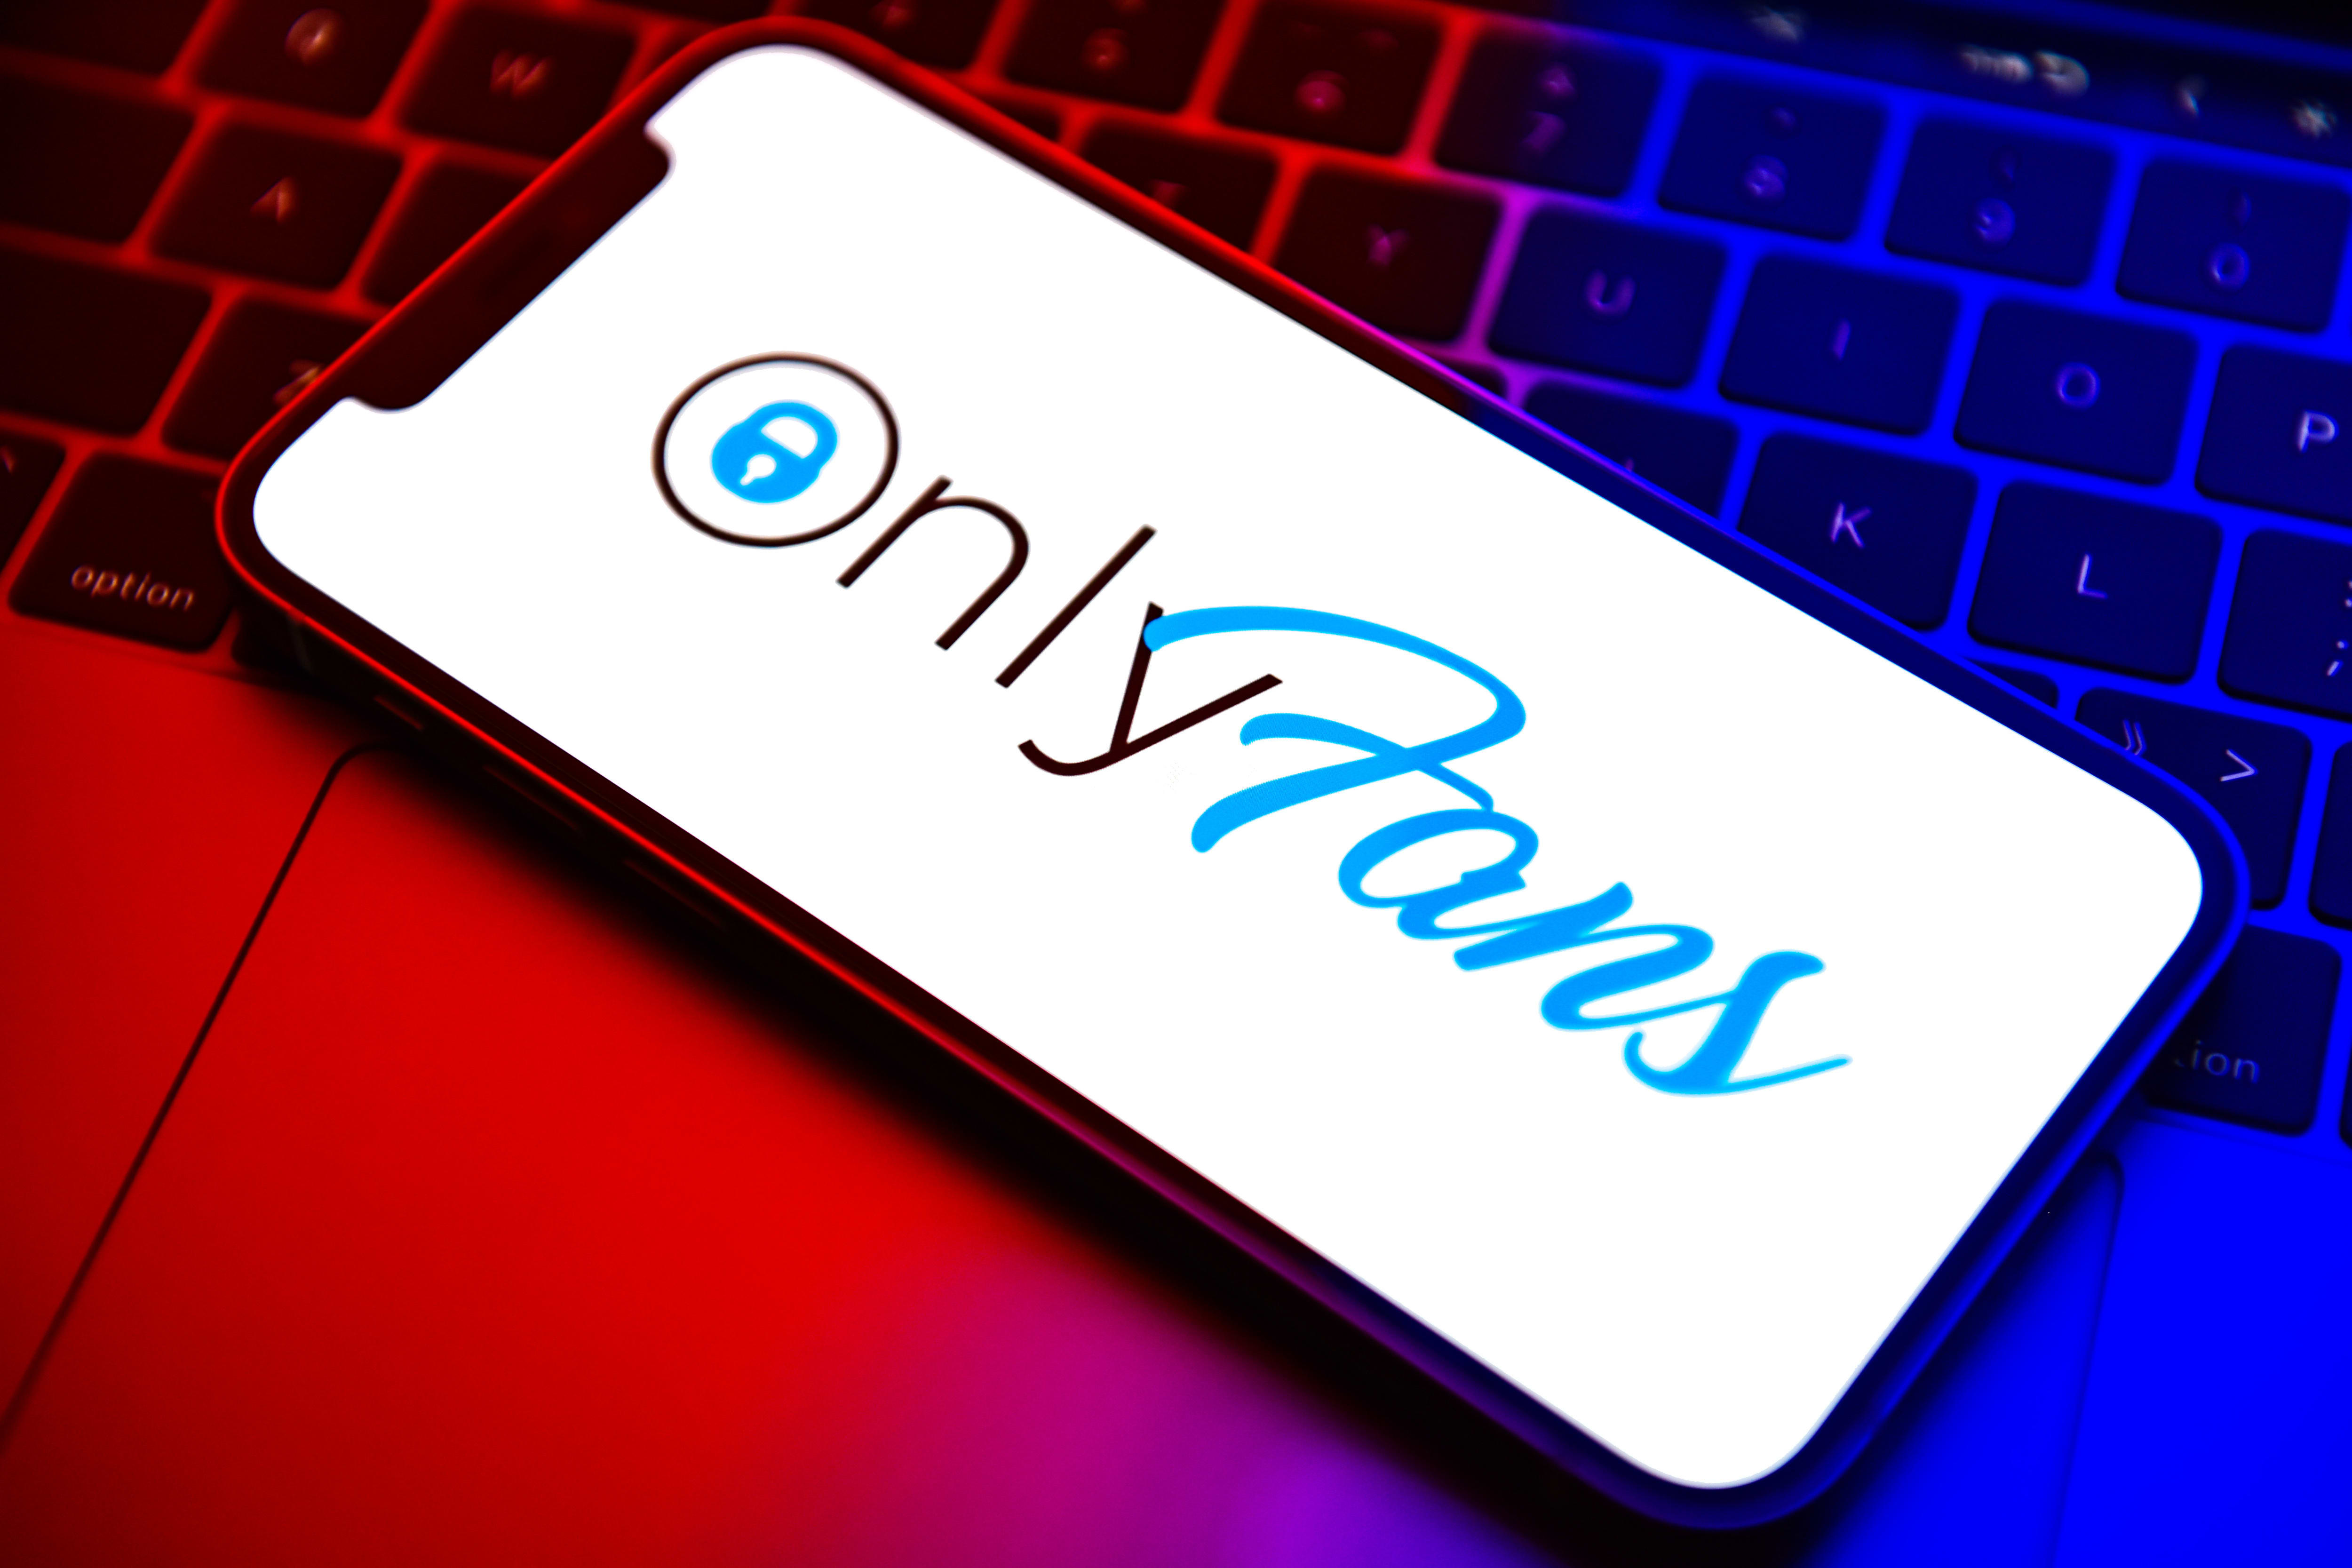 Porn Banned In Us - OnlyFans CEO explains why the site banned porn